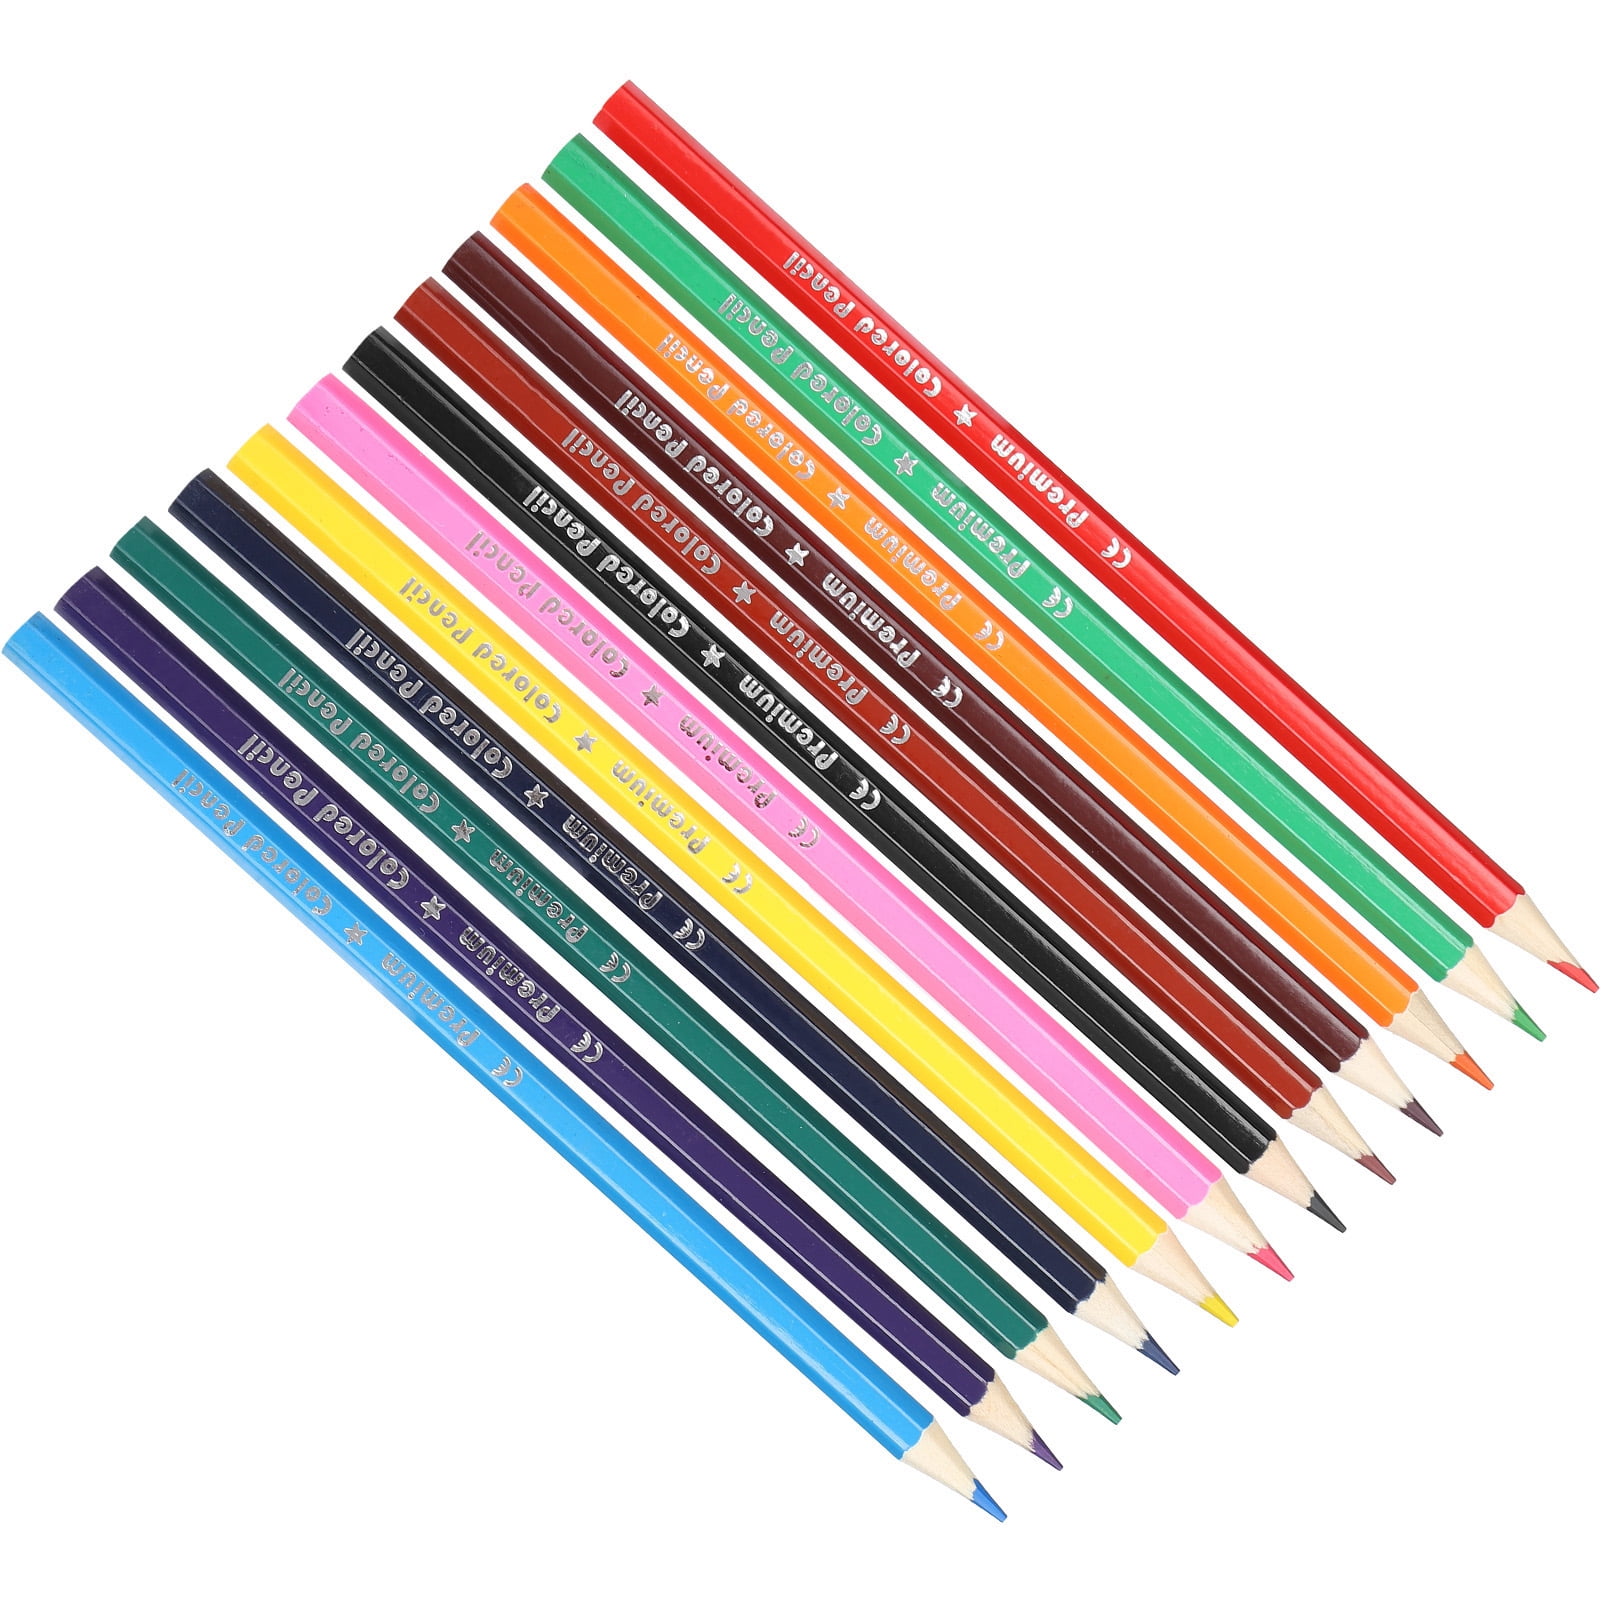 12 Color Pencils 3.0 Advanced Core Cute Basswood Colored Pencil Set  High-quality Pencil for Kid School Graffiti Drawing Painting